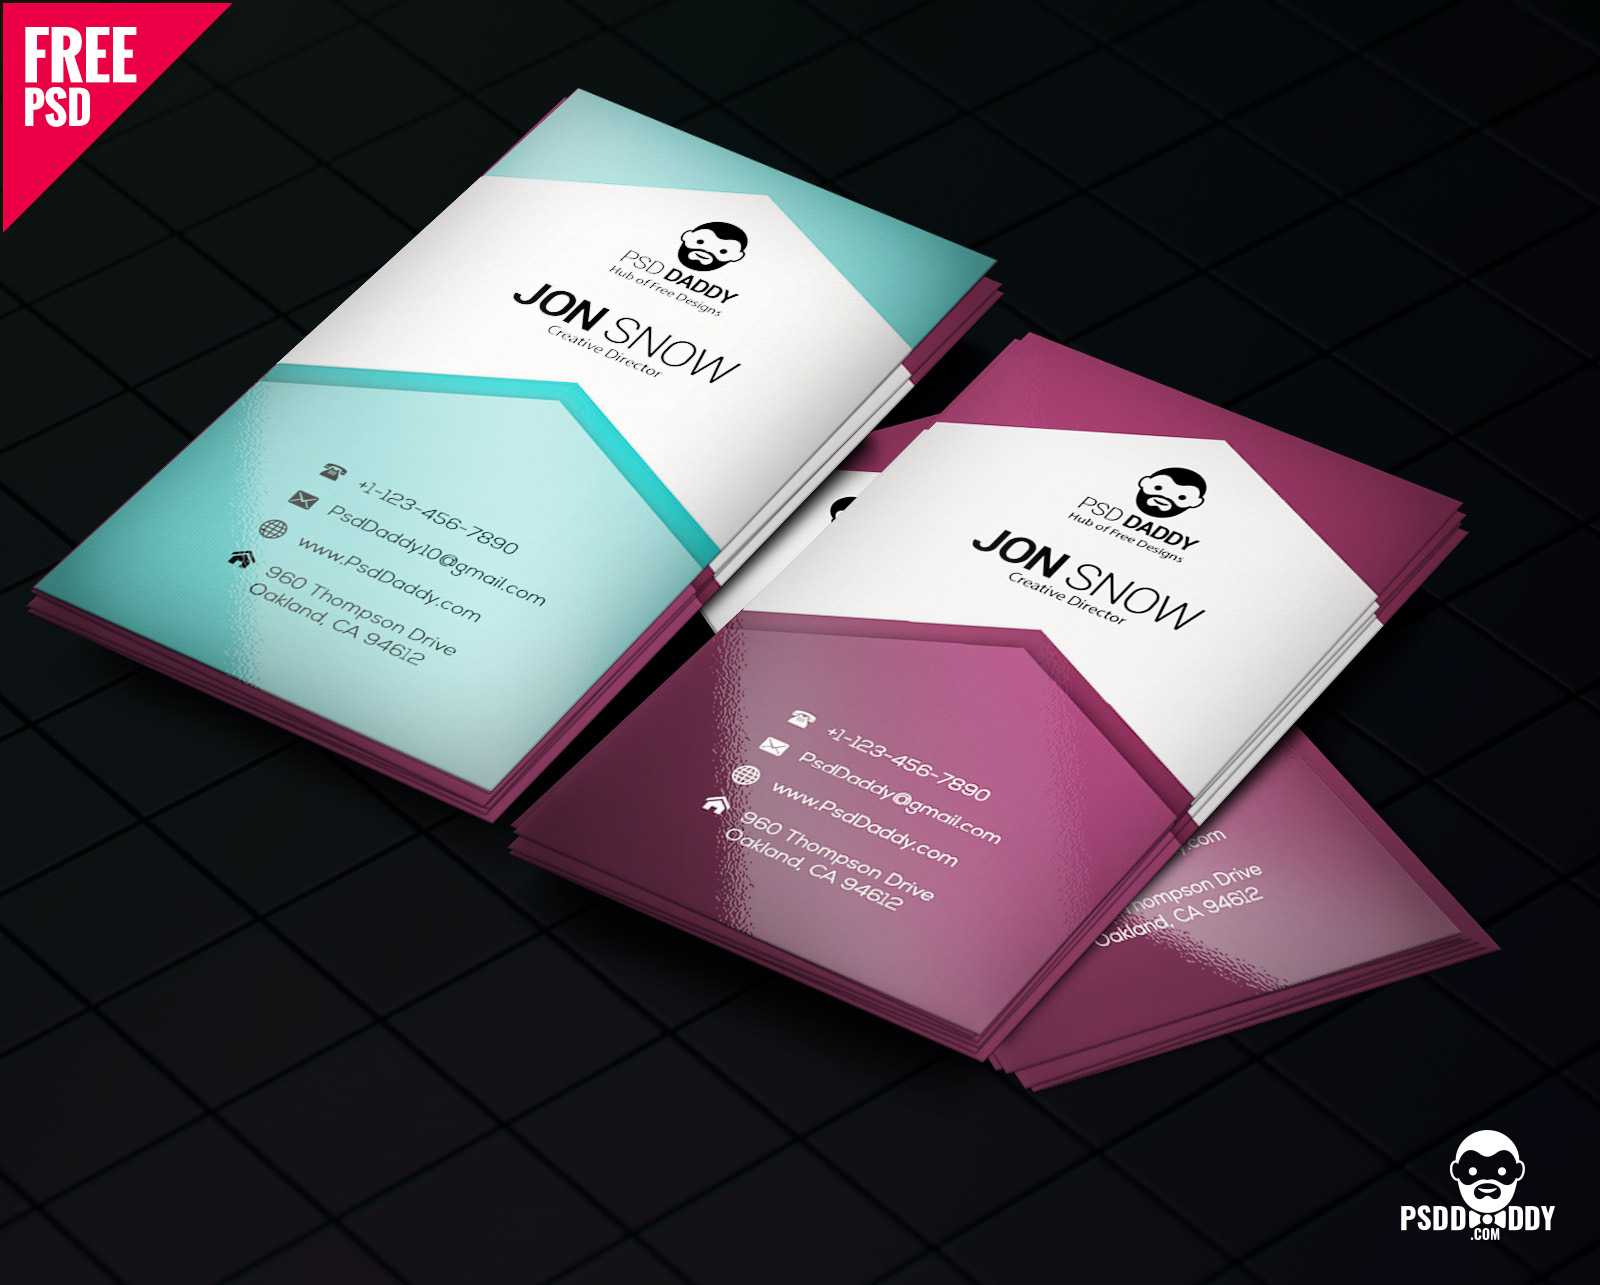 Download]Creative Business Card Psd Free | Psddaddy Pertaining To Download Visiting Card Templates